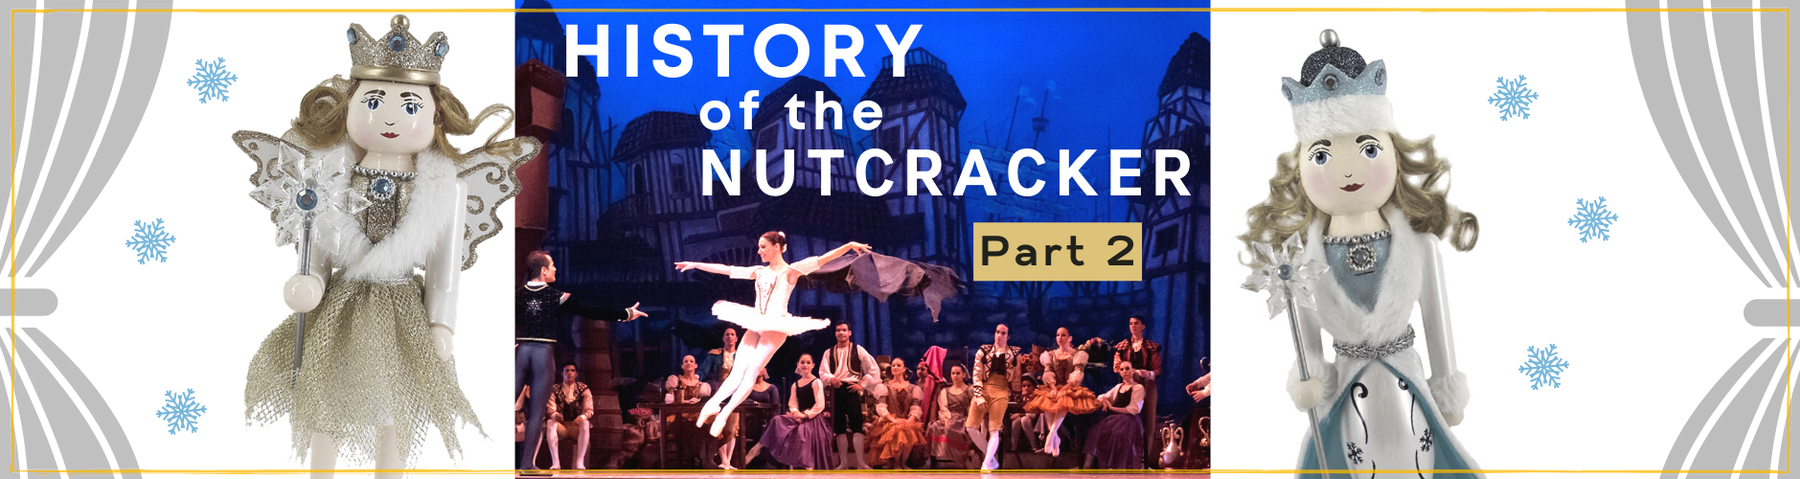 THE NUTCRACKER BALLET FINDS SUCCESS IN AMERICA HISTORY PART 2